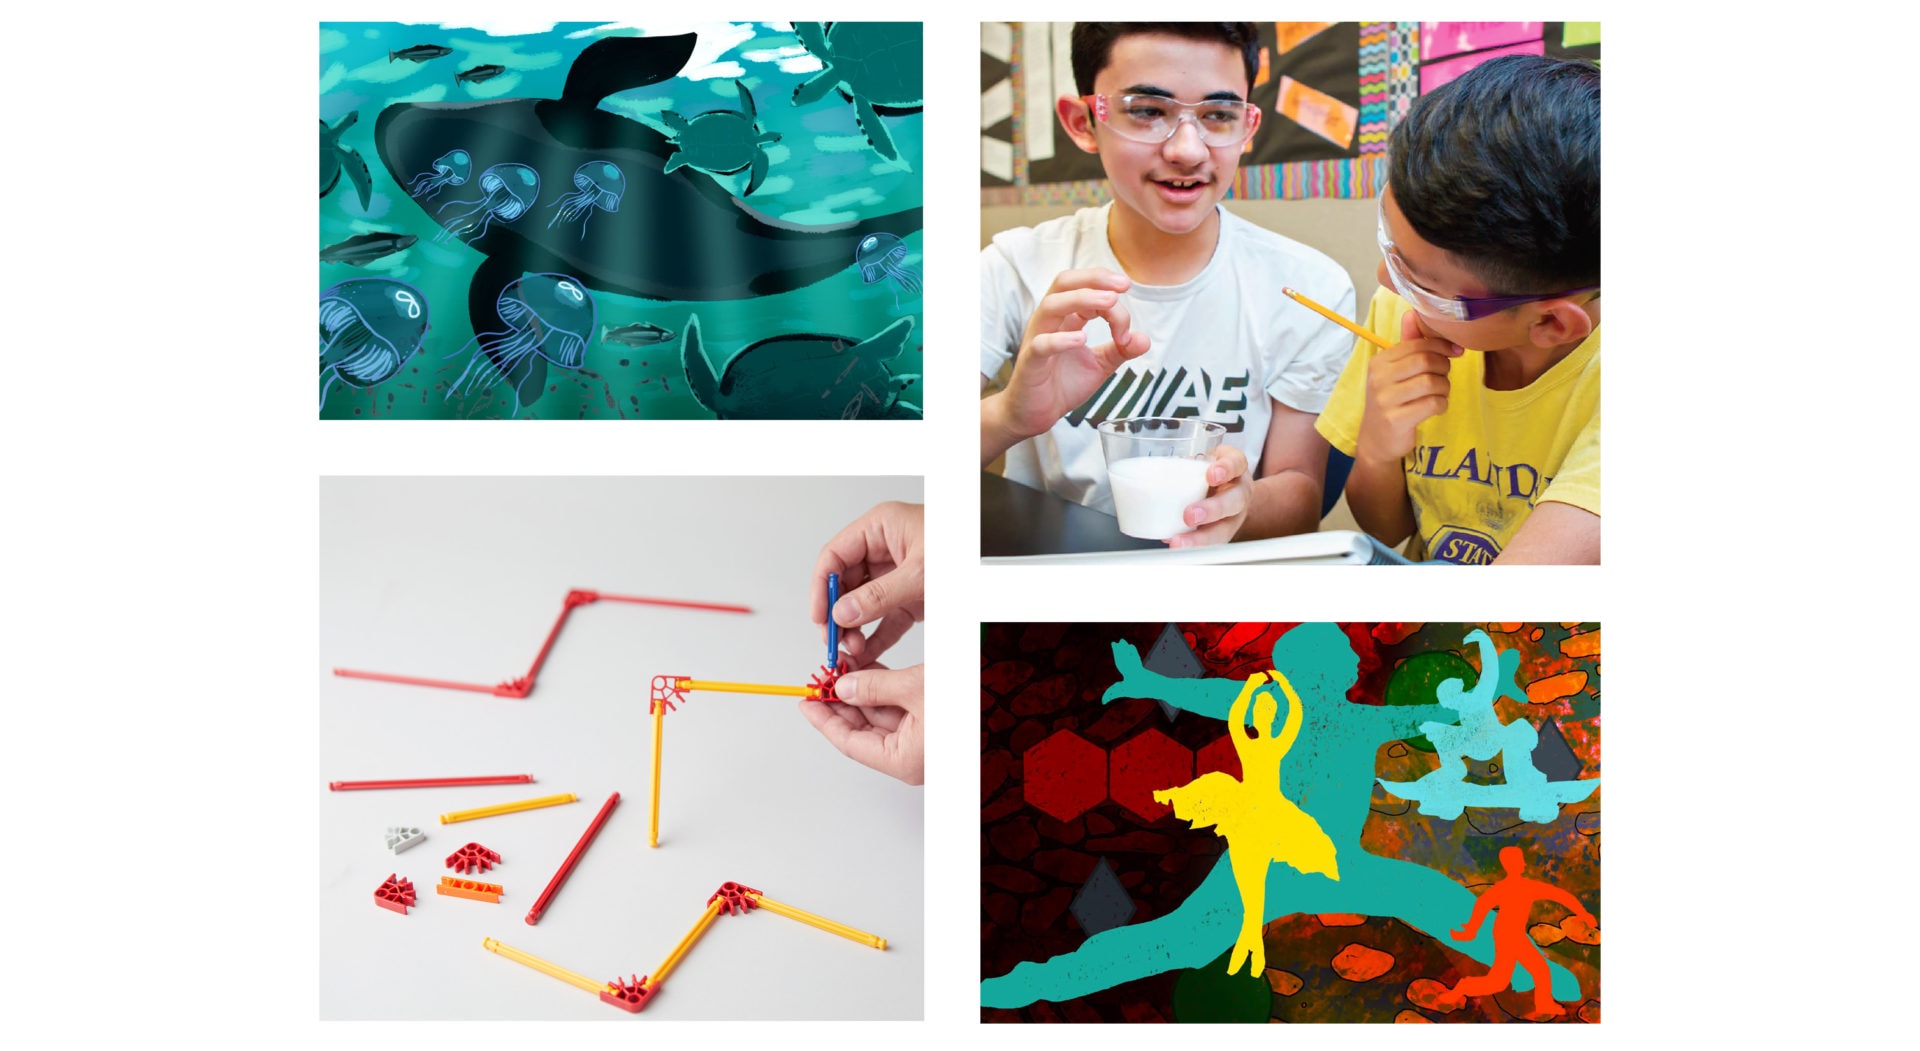 Collage of four images: underwater digital art, two students conducting a science experiment, hands constructing a structure from red straws, and an abstract painting of colorful figures.